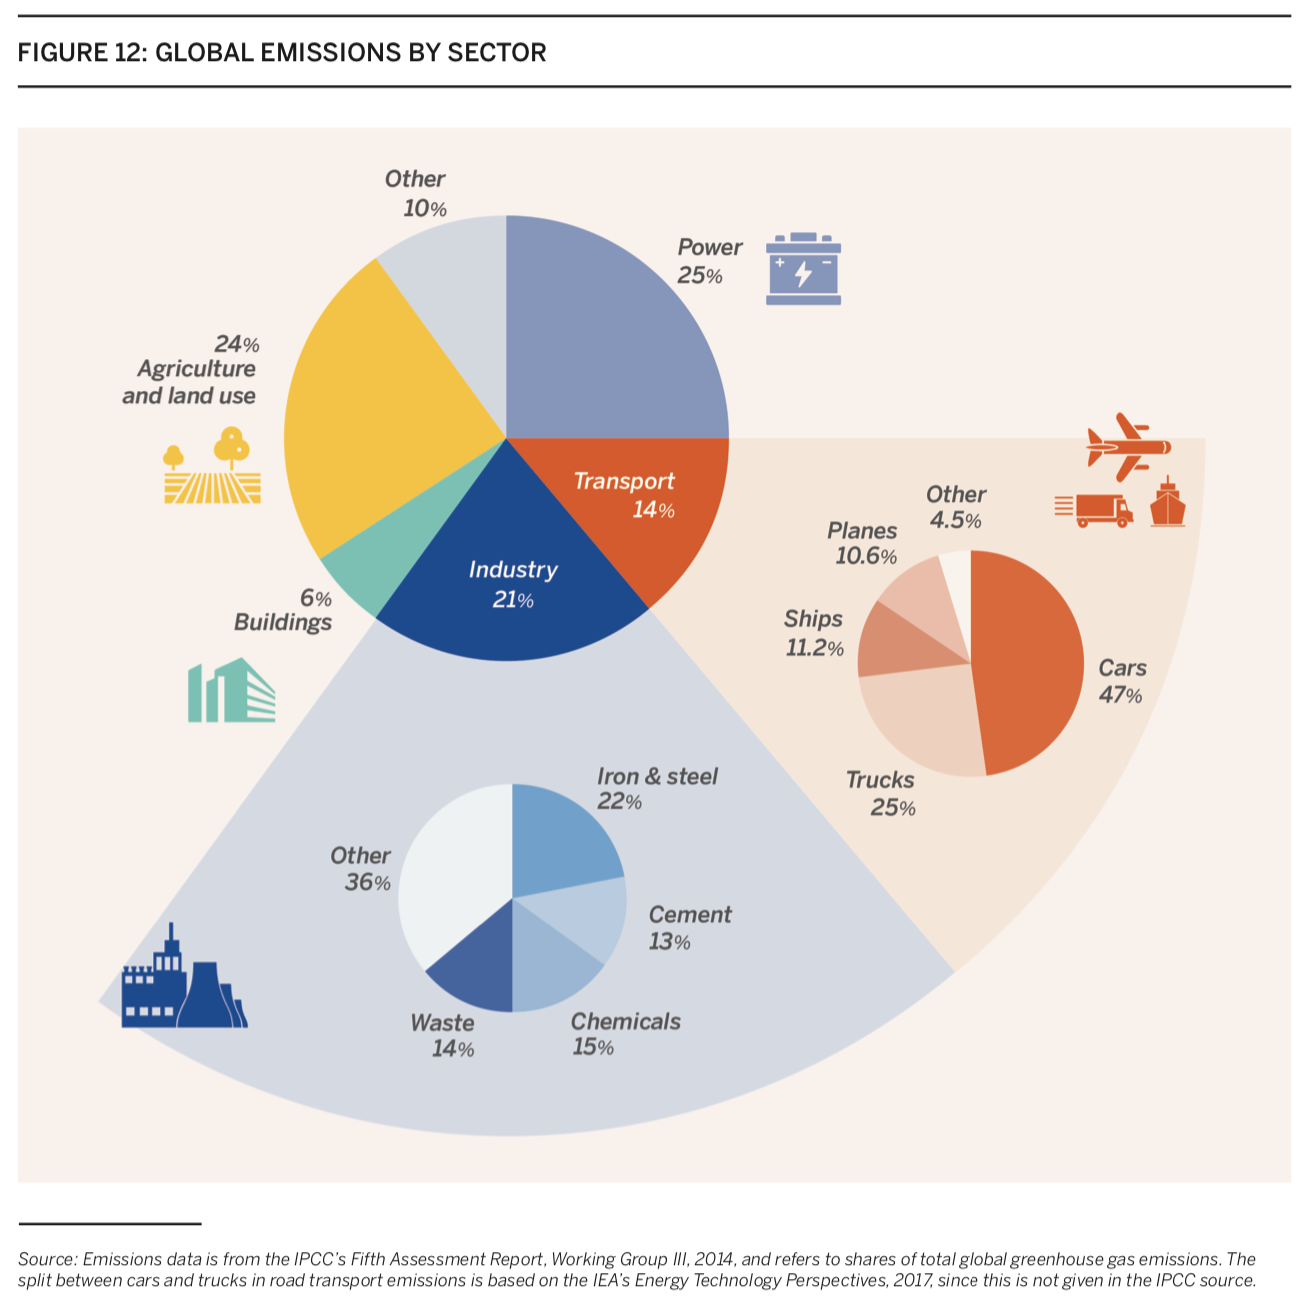 FIGURE 12: GLOBAL EMISSIONS BY SECTOR

    

Other
10%
Power
—

24%

Agriculture

and land use

sa,
Transport /-
14 =H i
Industry
6% 21
Buildings
Cars
I 47%
Iron & steel Trucks
22% 25%
Other
36%
Cement
13%
Waste Chemicals
14% 15%

   
   

and refers to shares of
ogy Perspectives. 2017.

Assessment Report, Working Gr
missions is based on the IEA’